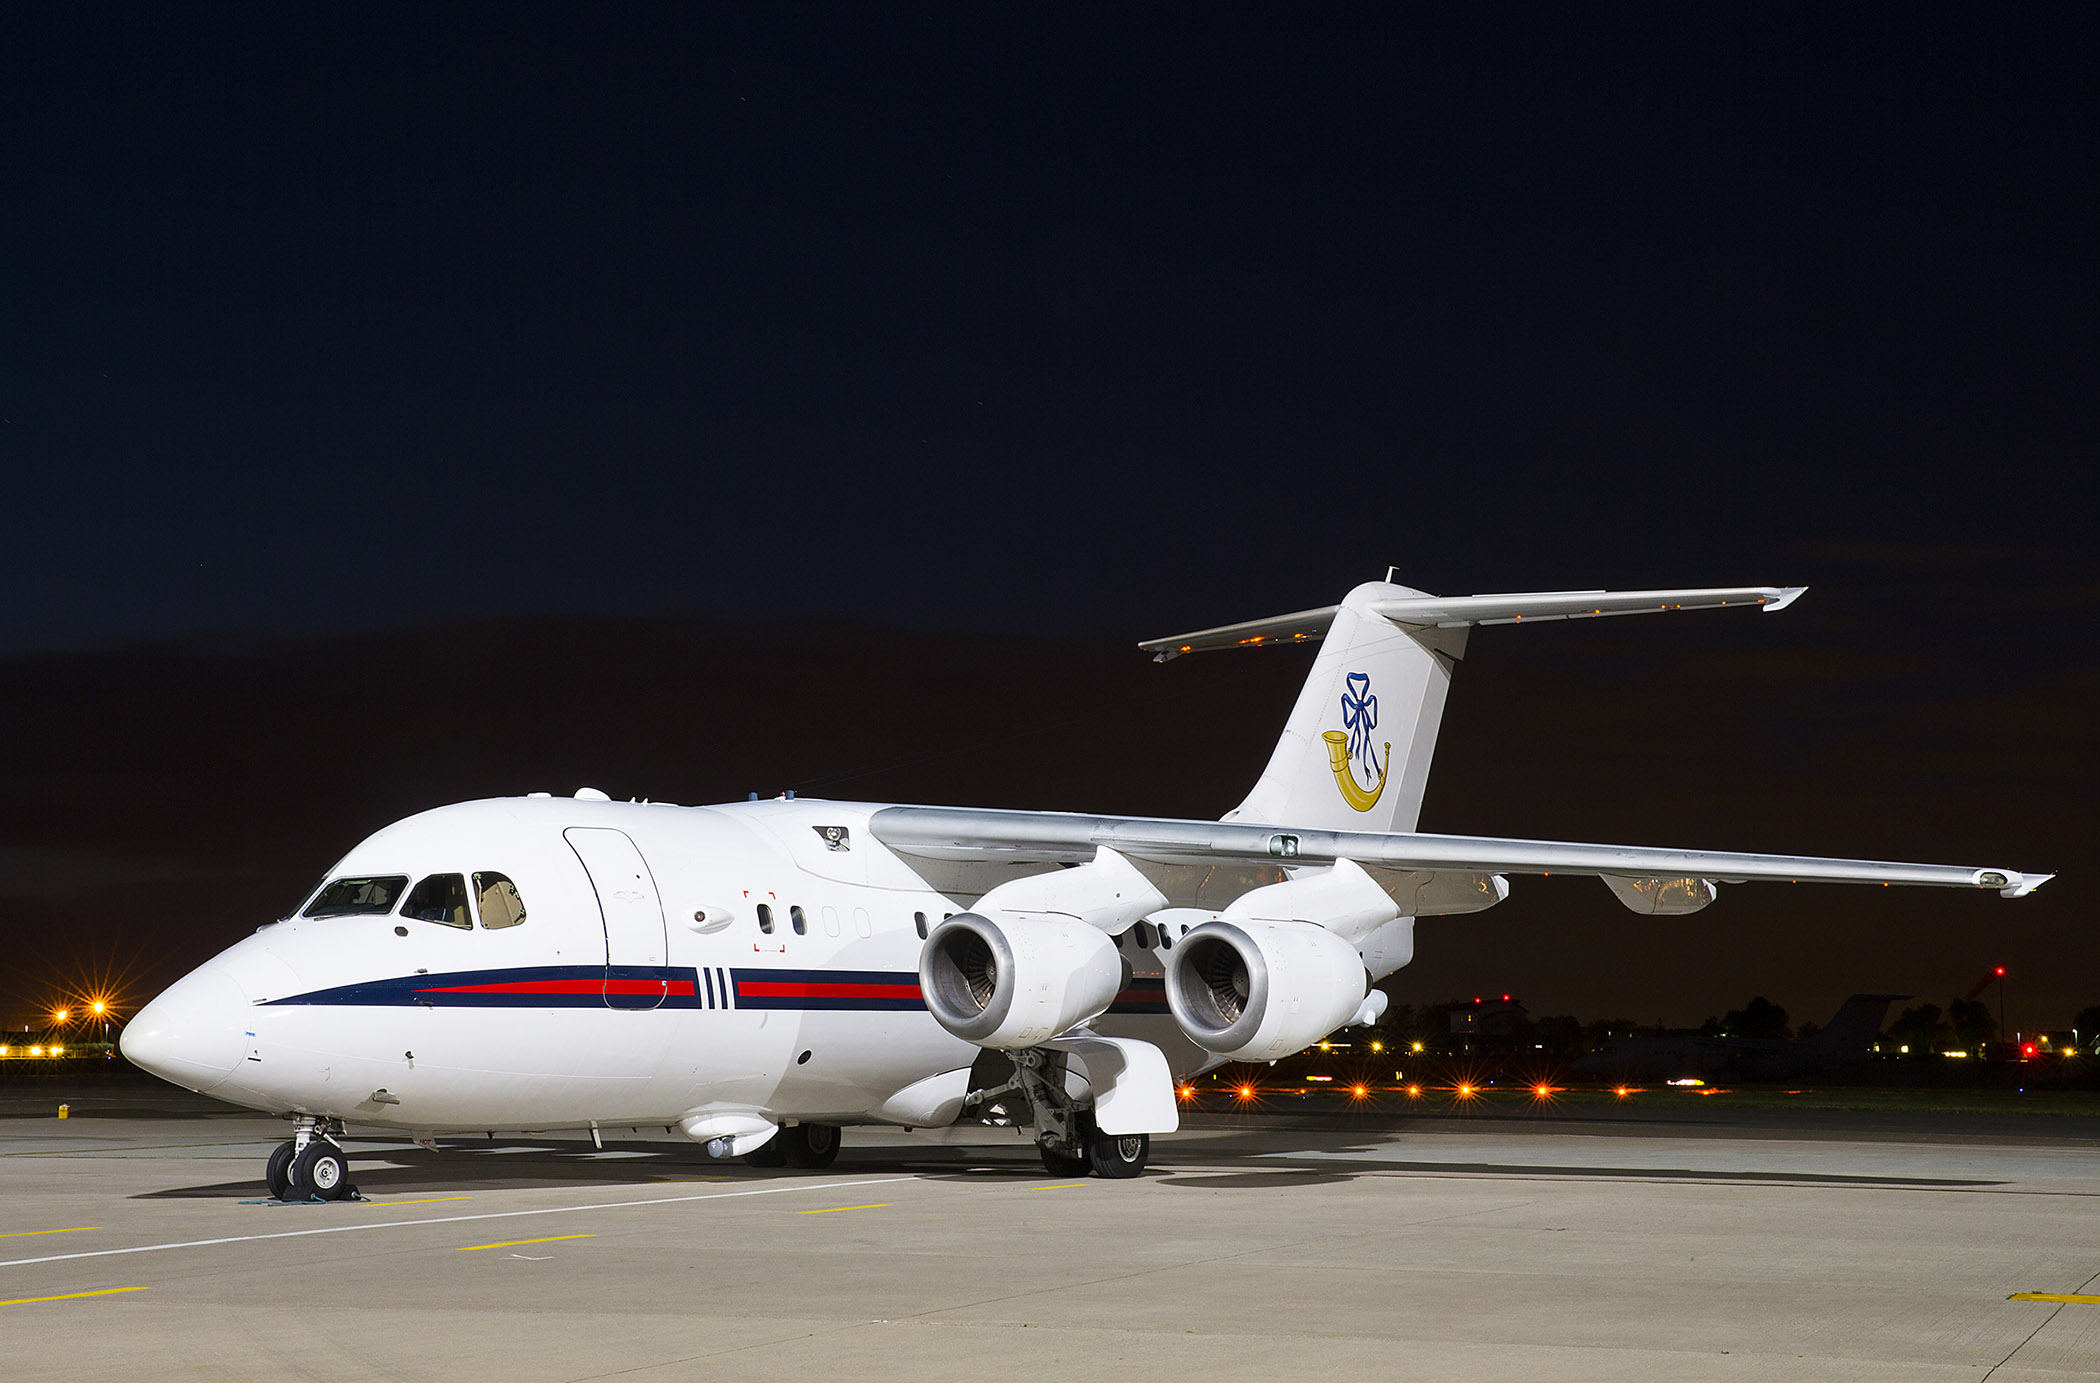 BAe146 aircraft on the airfield at night.